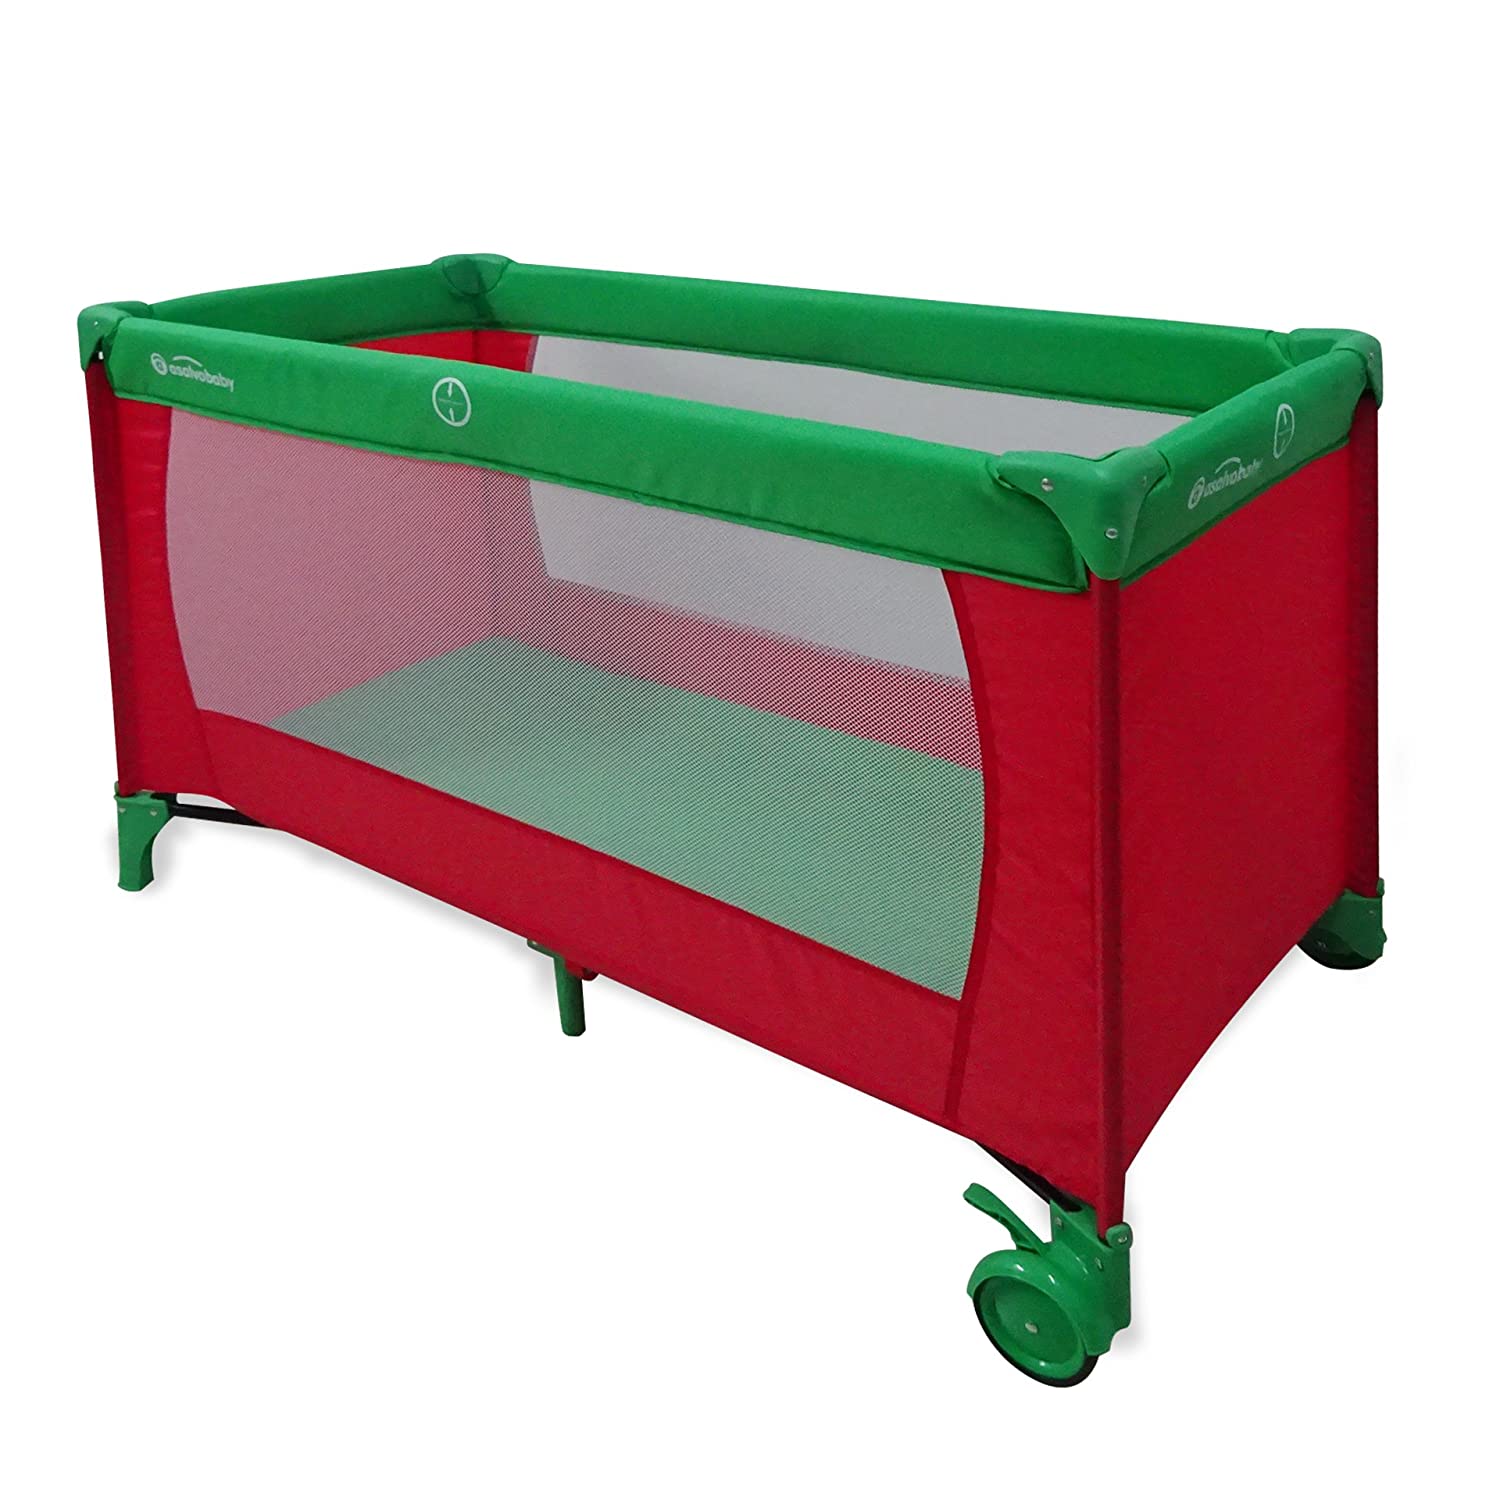 Asalvo 11015.0 Travel Cot Baleares red-green